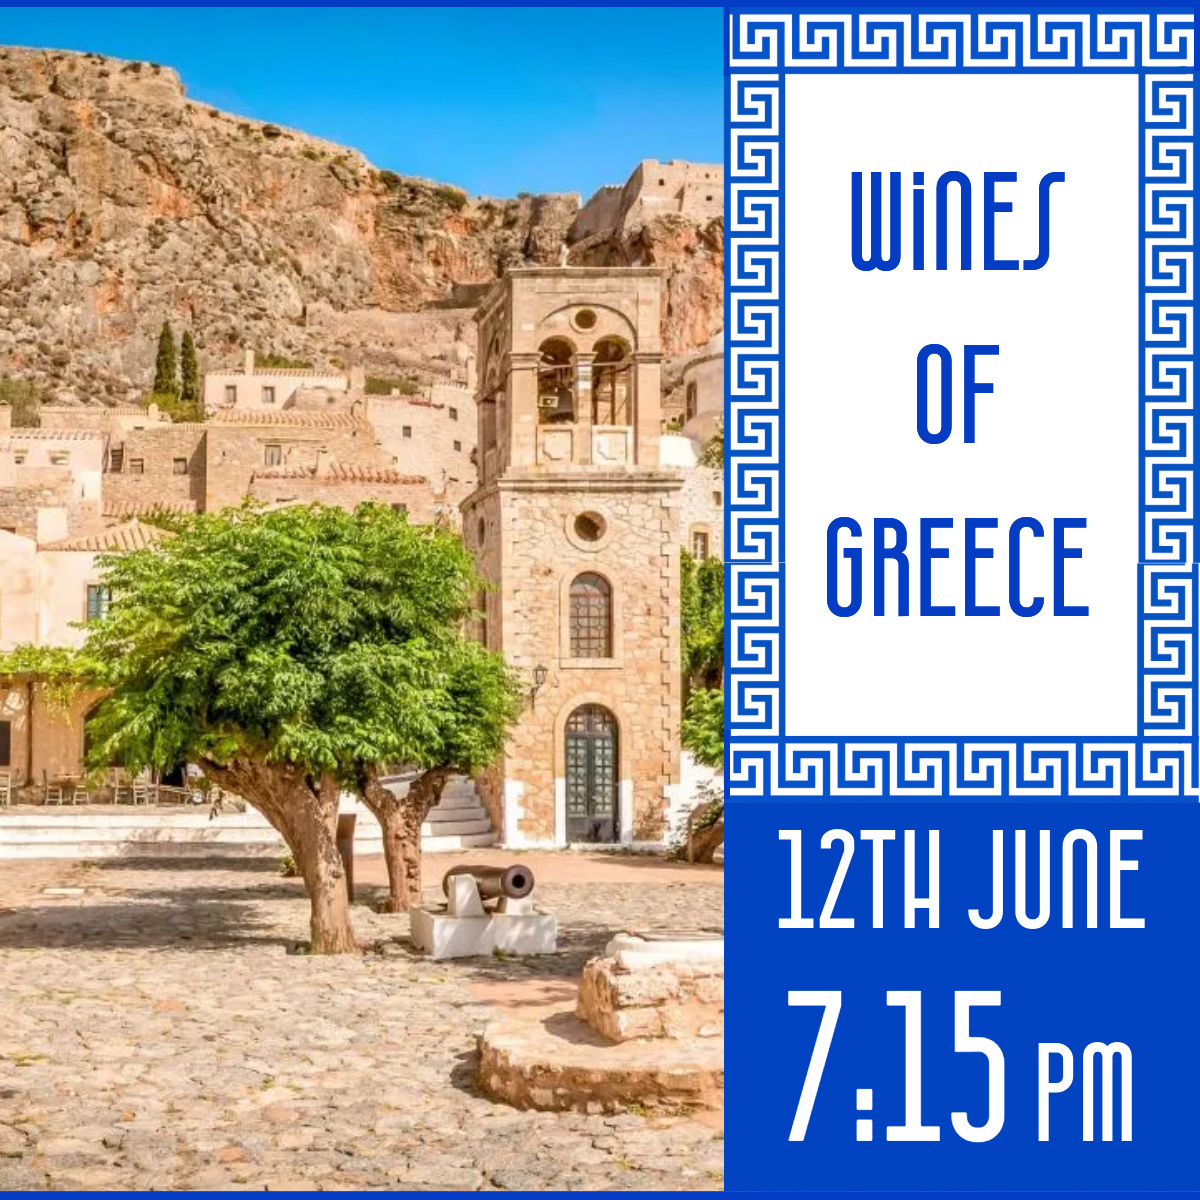 7:15-8:00pm: Meet the Producers: Wines of Greece